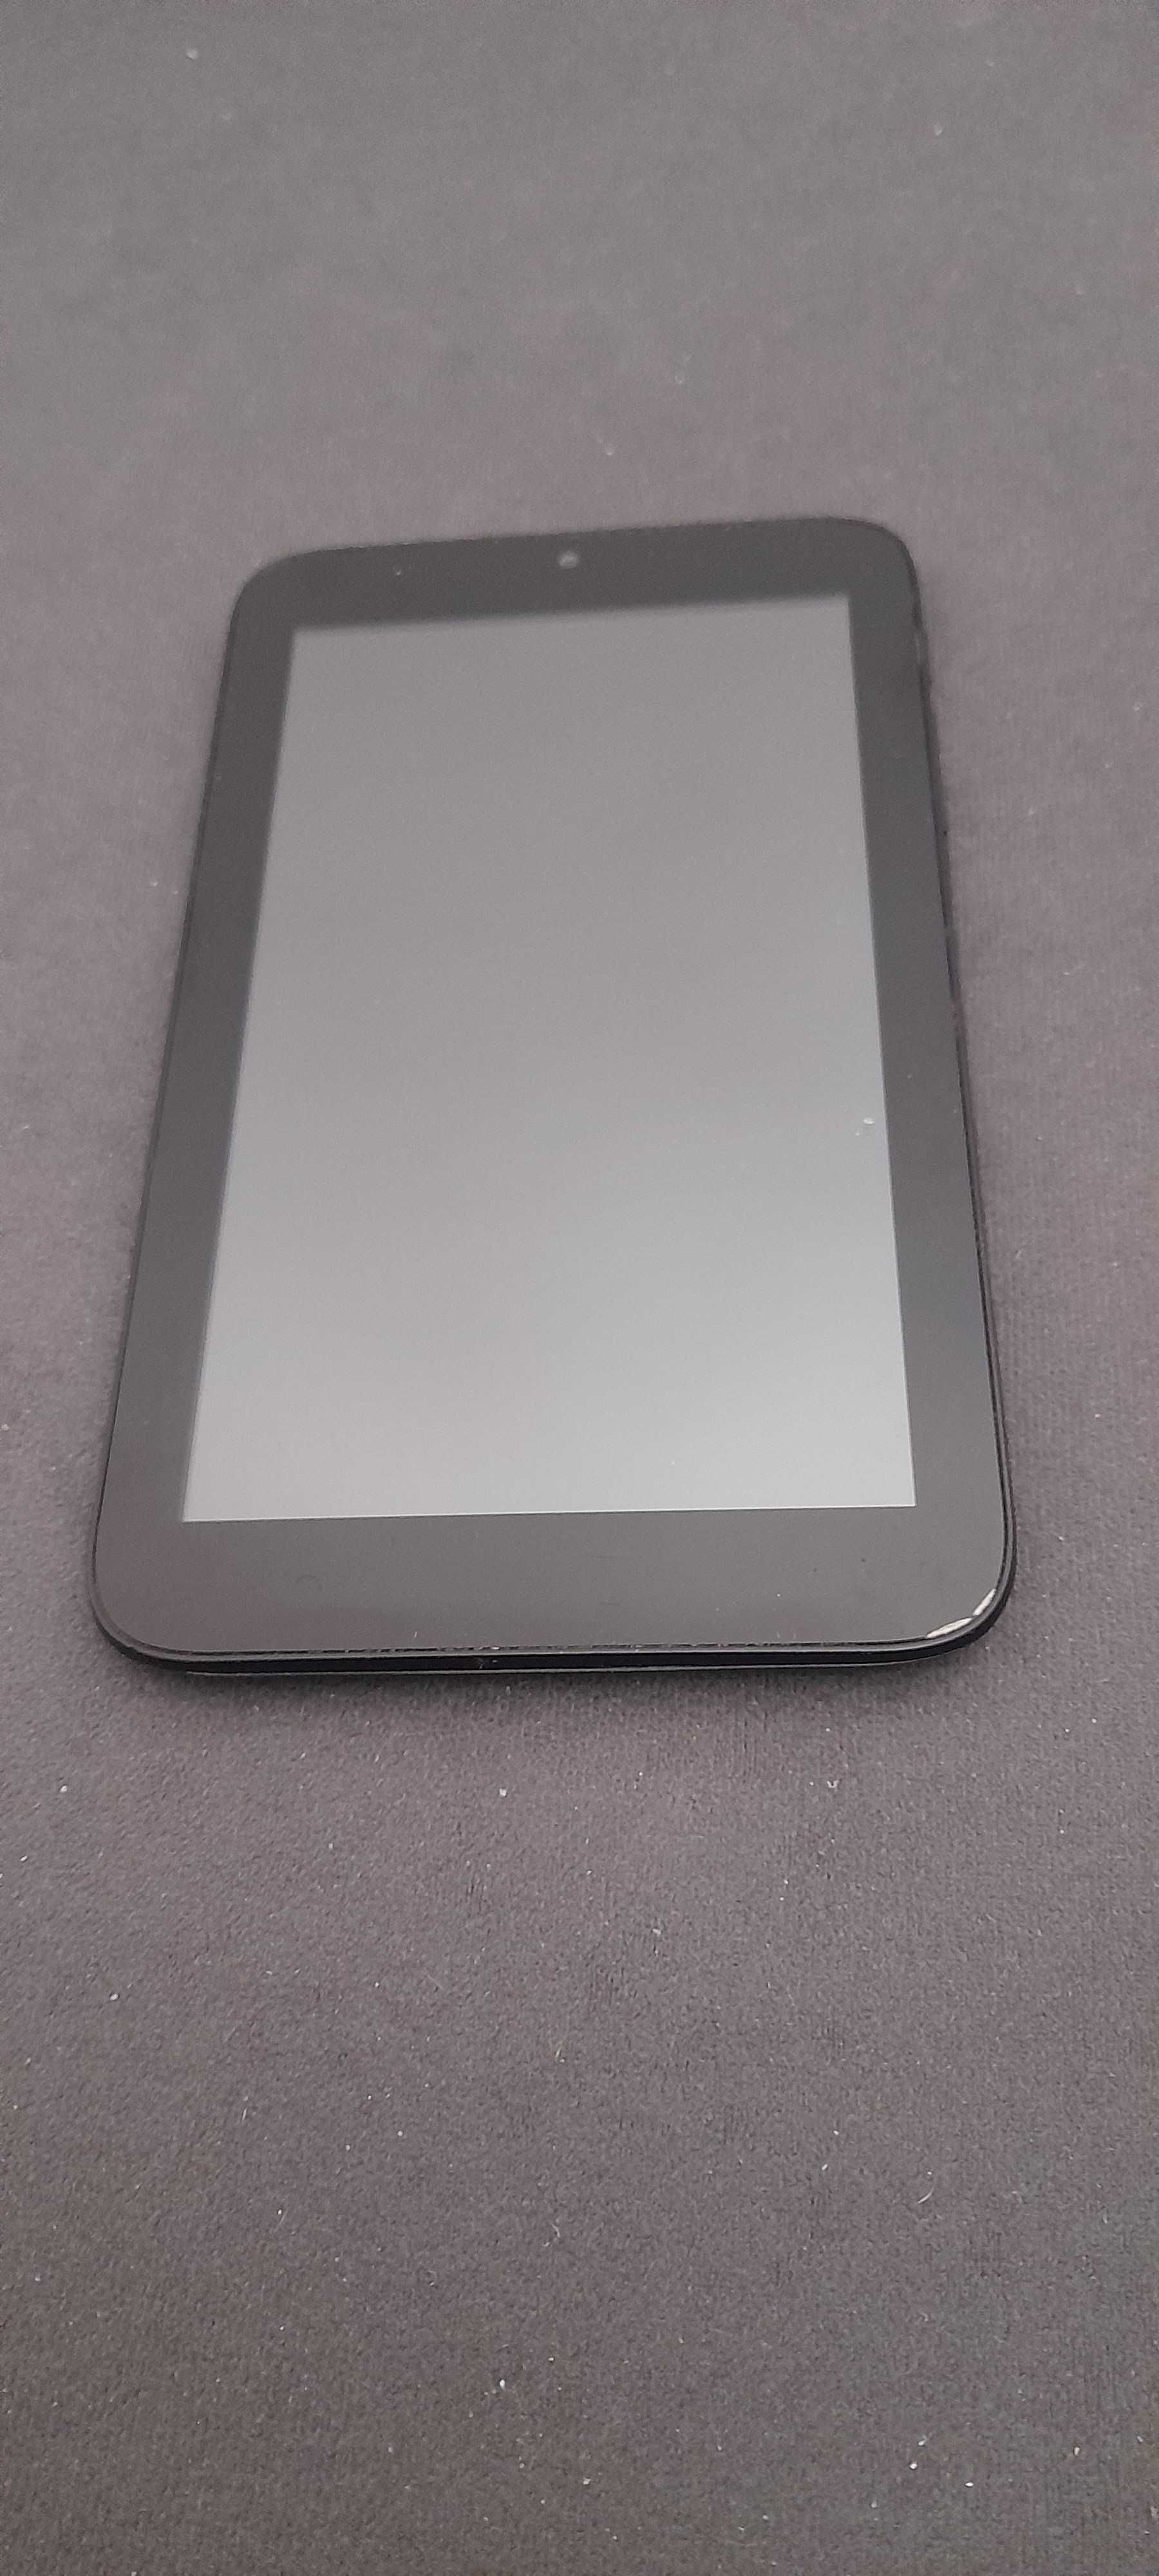 Tablet Alcatel one touch